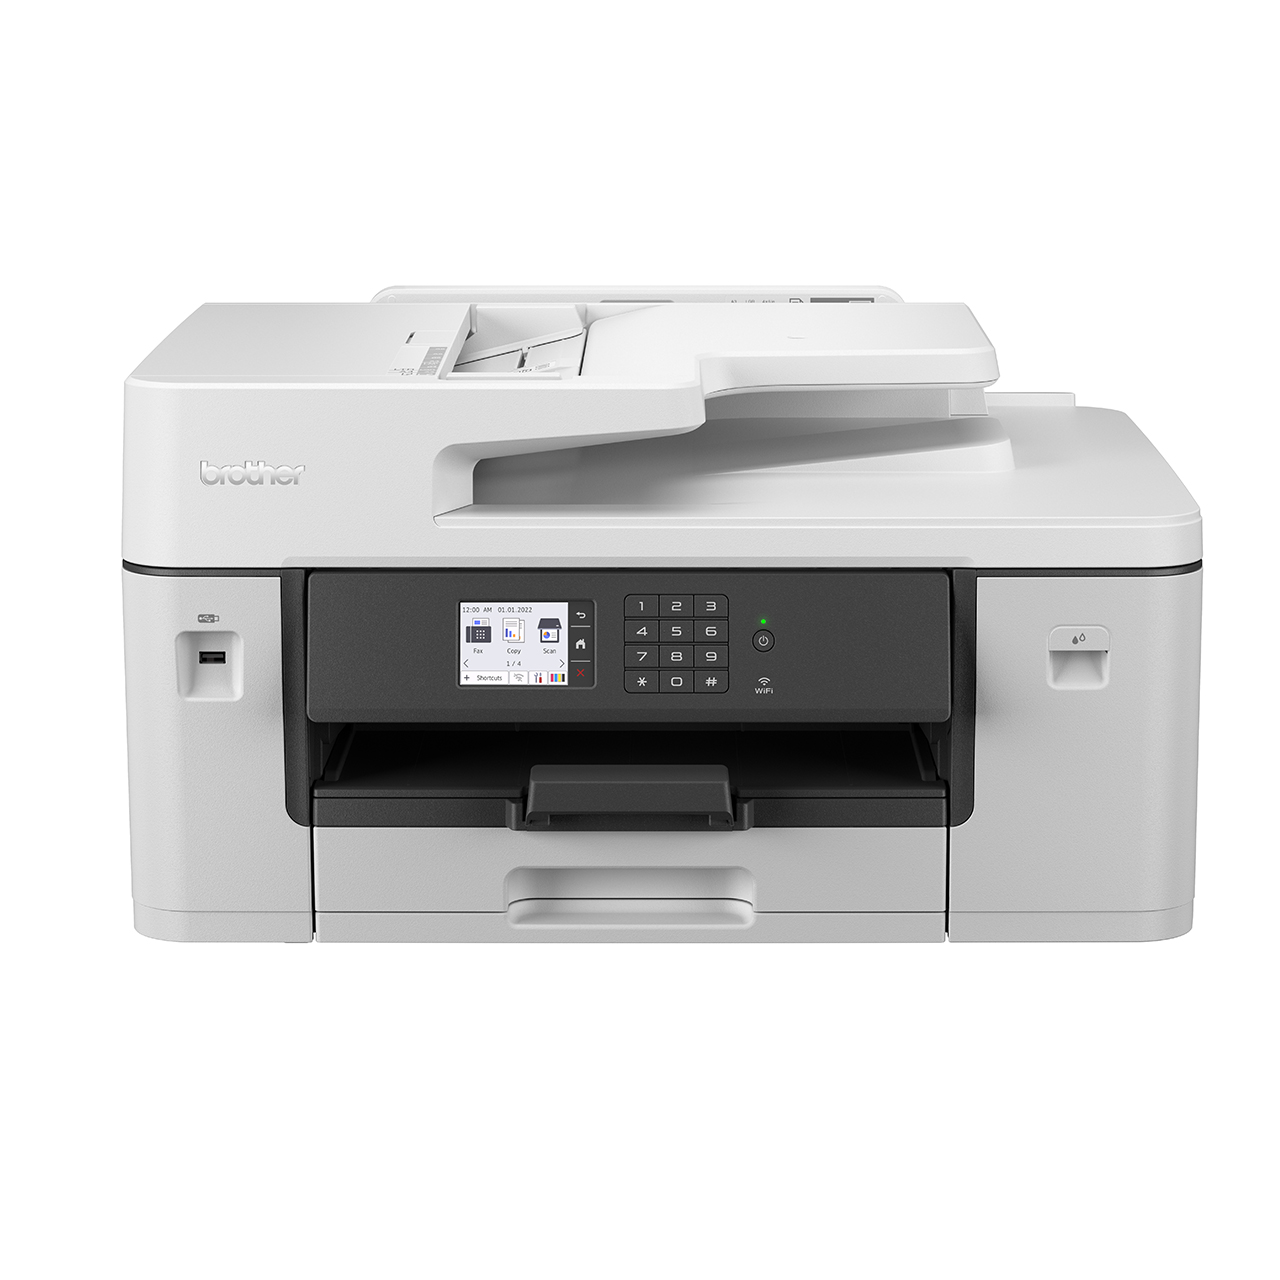 Brother MFC-J3540DW Professional A3 inkjet Wireless All-in-One (8CH51300141) Help Tech Co. Ltd